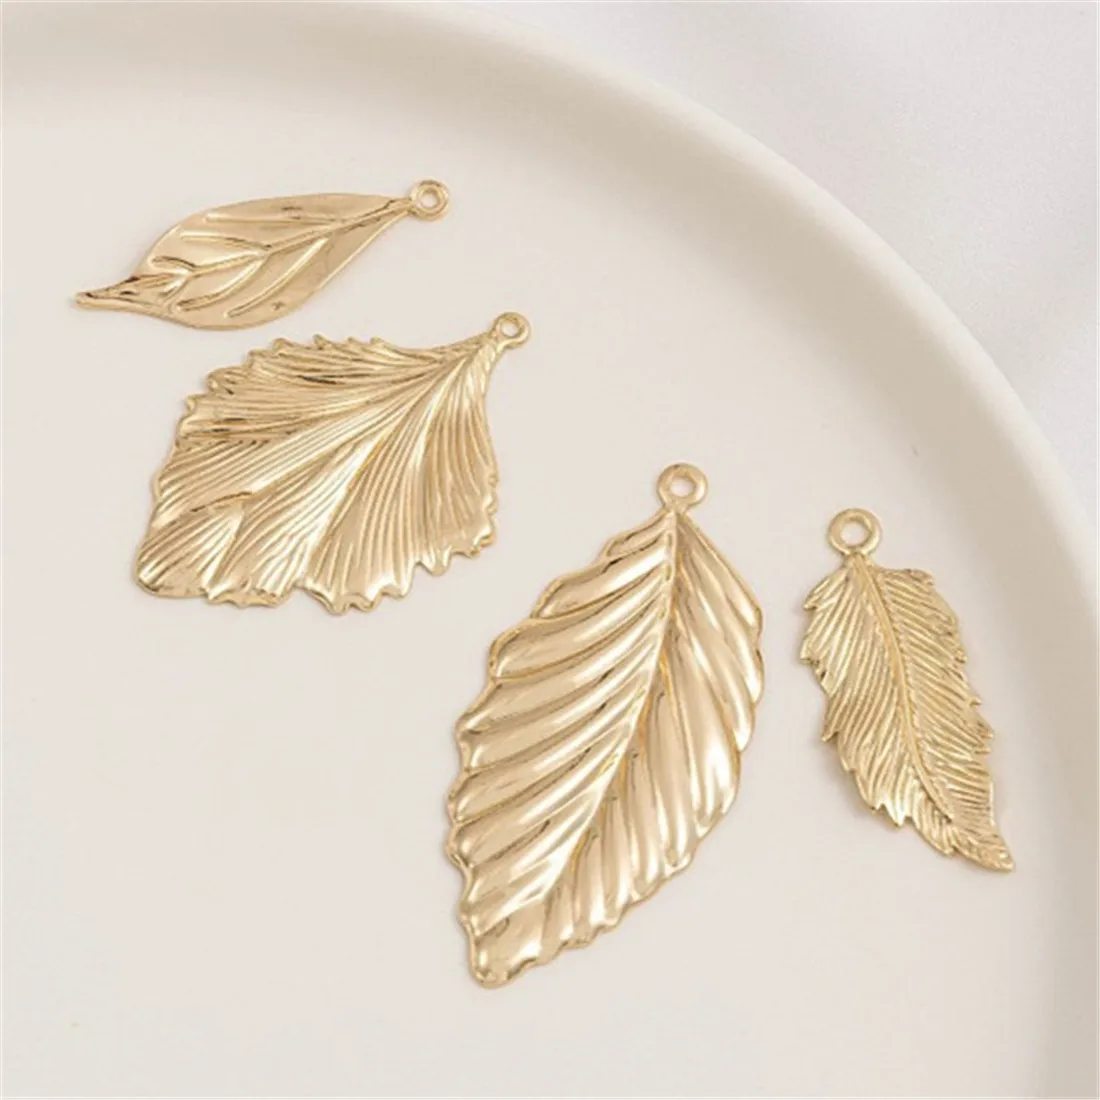 

14K Gold Wrapped Textured Leaf Pendant, Ginkgo Leaf Pendant, DIY Handmade Earrings, Hairpin Pendant Accessories D025